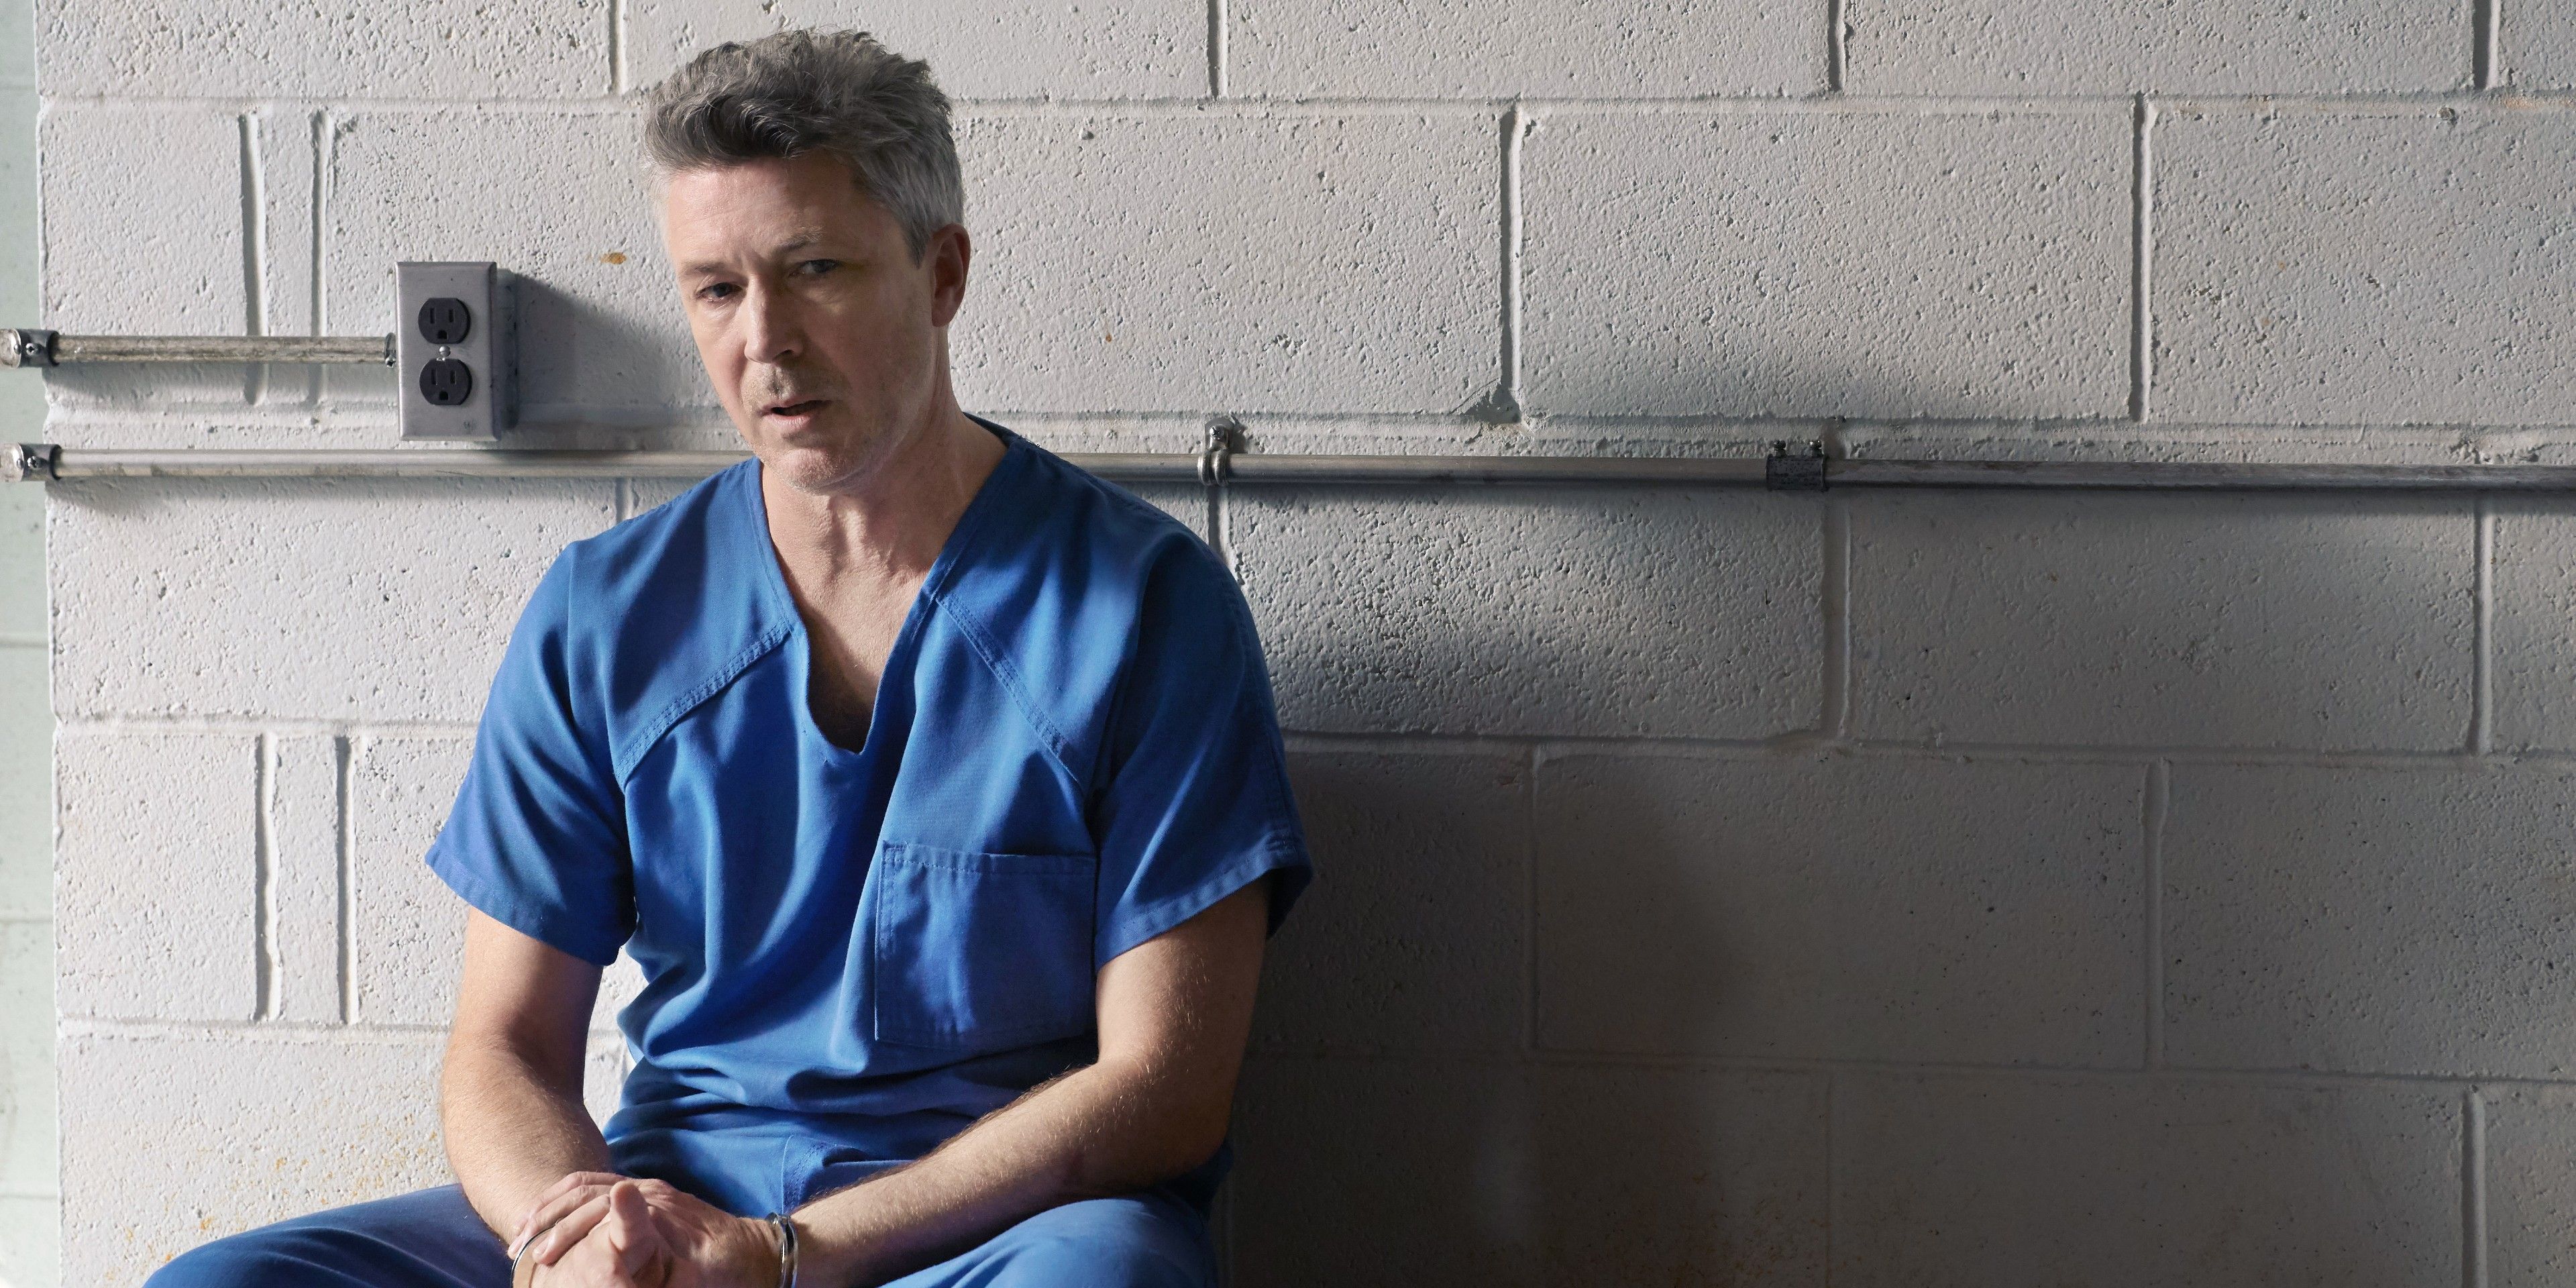 Gillen, handcuffed, sits against a cement wall